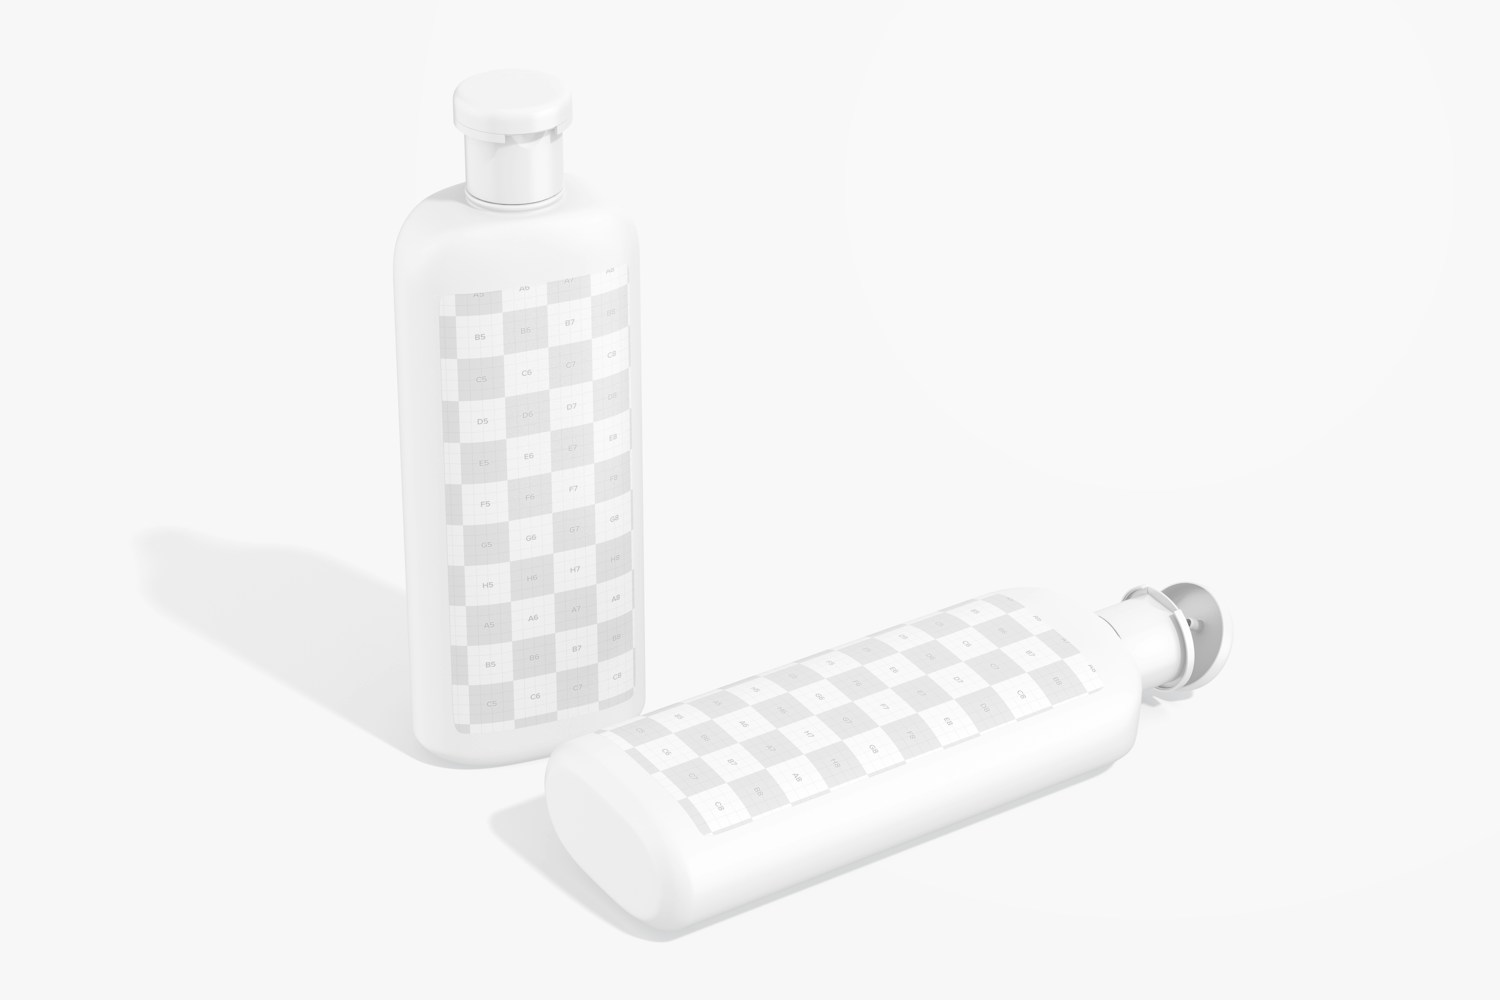 400 ml Shampoo Bottles Mockup, Standing and Dropped